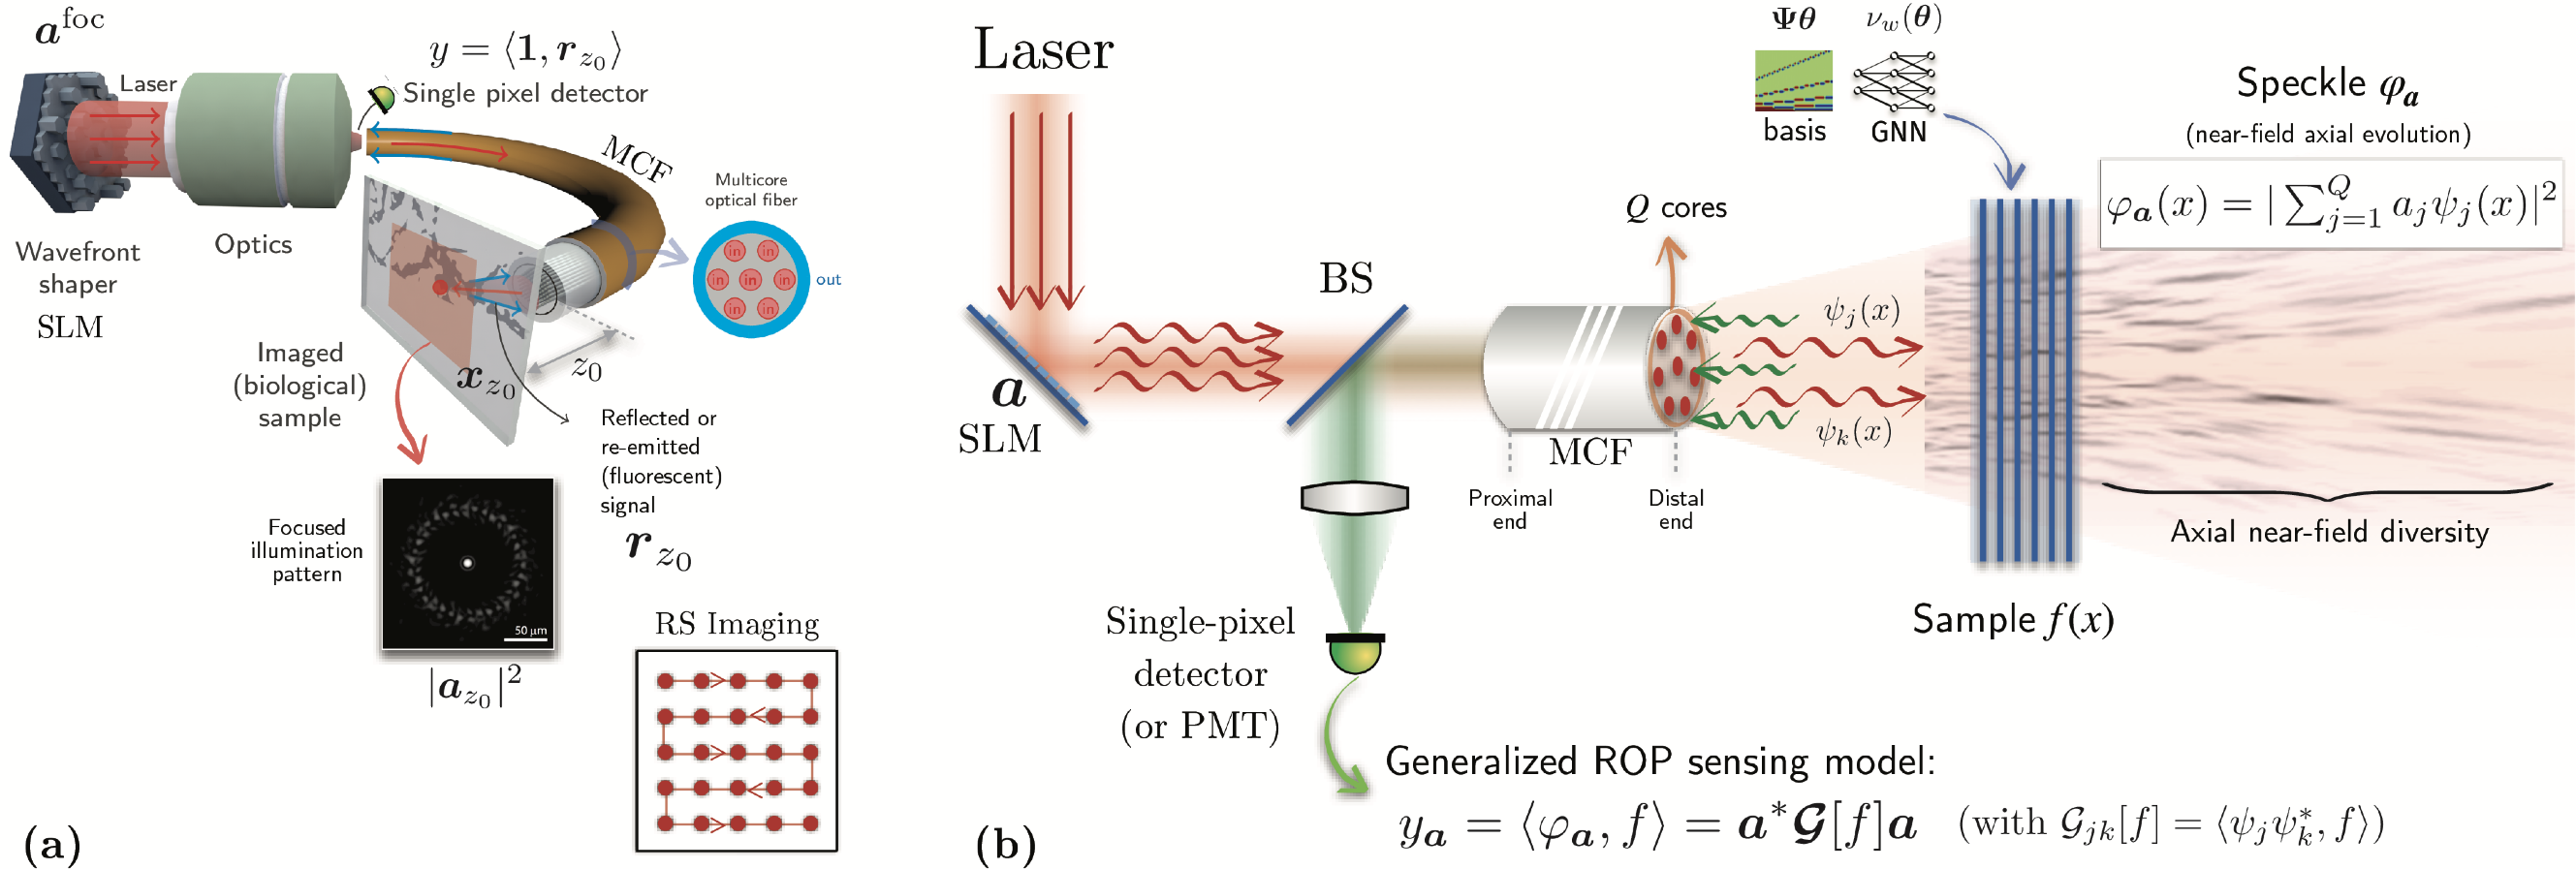 Figure 1: Working principle of a lensless endoscope (legend: SLM: spatial light modulator; BS: beam-splitter; MCF: multicore optical fiber; PMT: photomultiplier). (a) Conventional raster-scan lensless endoscopy (RS-LE). In RS-LE, the light beam outgoing from the multicore optical fiber (MCF) at the distal end is focused thanks to a wavefront shaper (SLM) at the proximal end. Translating the focused illumination line-by-line and collecting the reflected/re-emitted light for each location in an external single-pixel detector enables the imaging of the (fluorescent) biological sample at a specified depth [8]. (b) 3-D interferometric lensless imaging (3ILI). In 3ILI, we aim to reconstruct a 3-D biological sample by leveraging the axial resolution of random speckles in the near field.